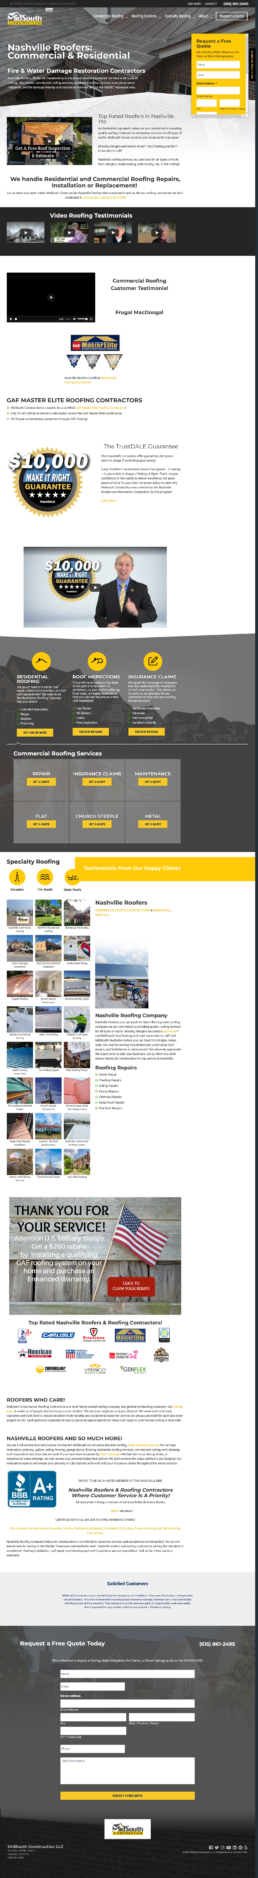 Image of midsouth roofing's construction website based in Nashville, TN.